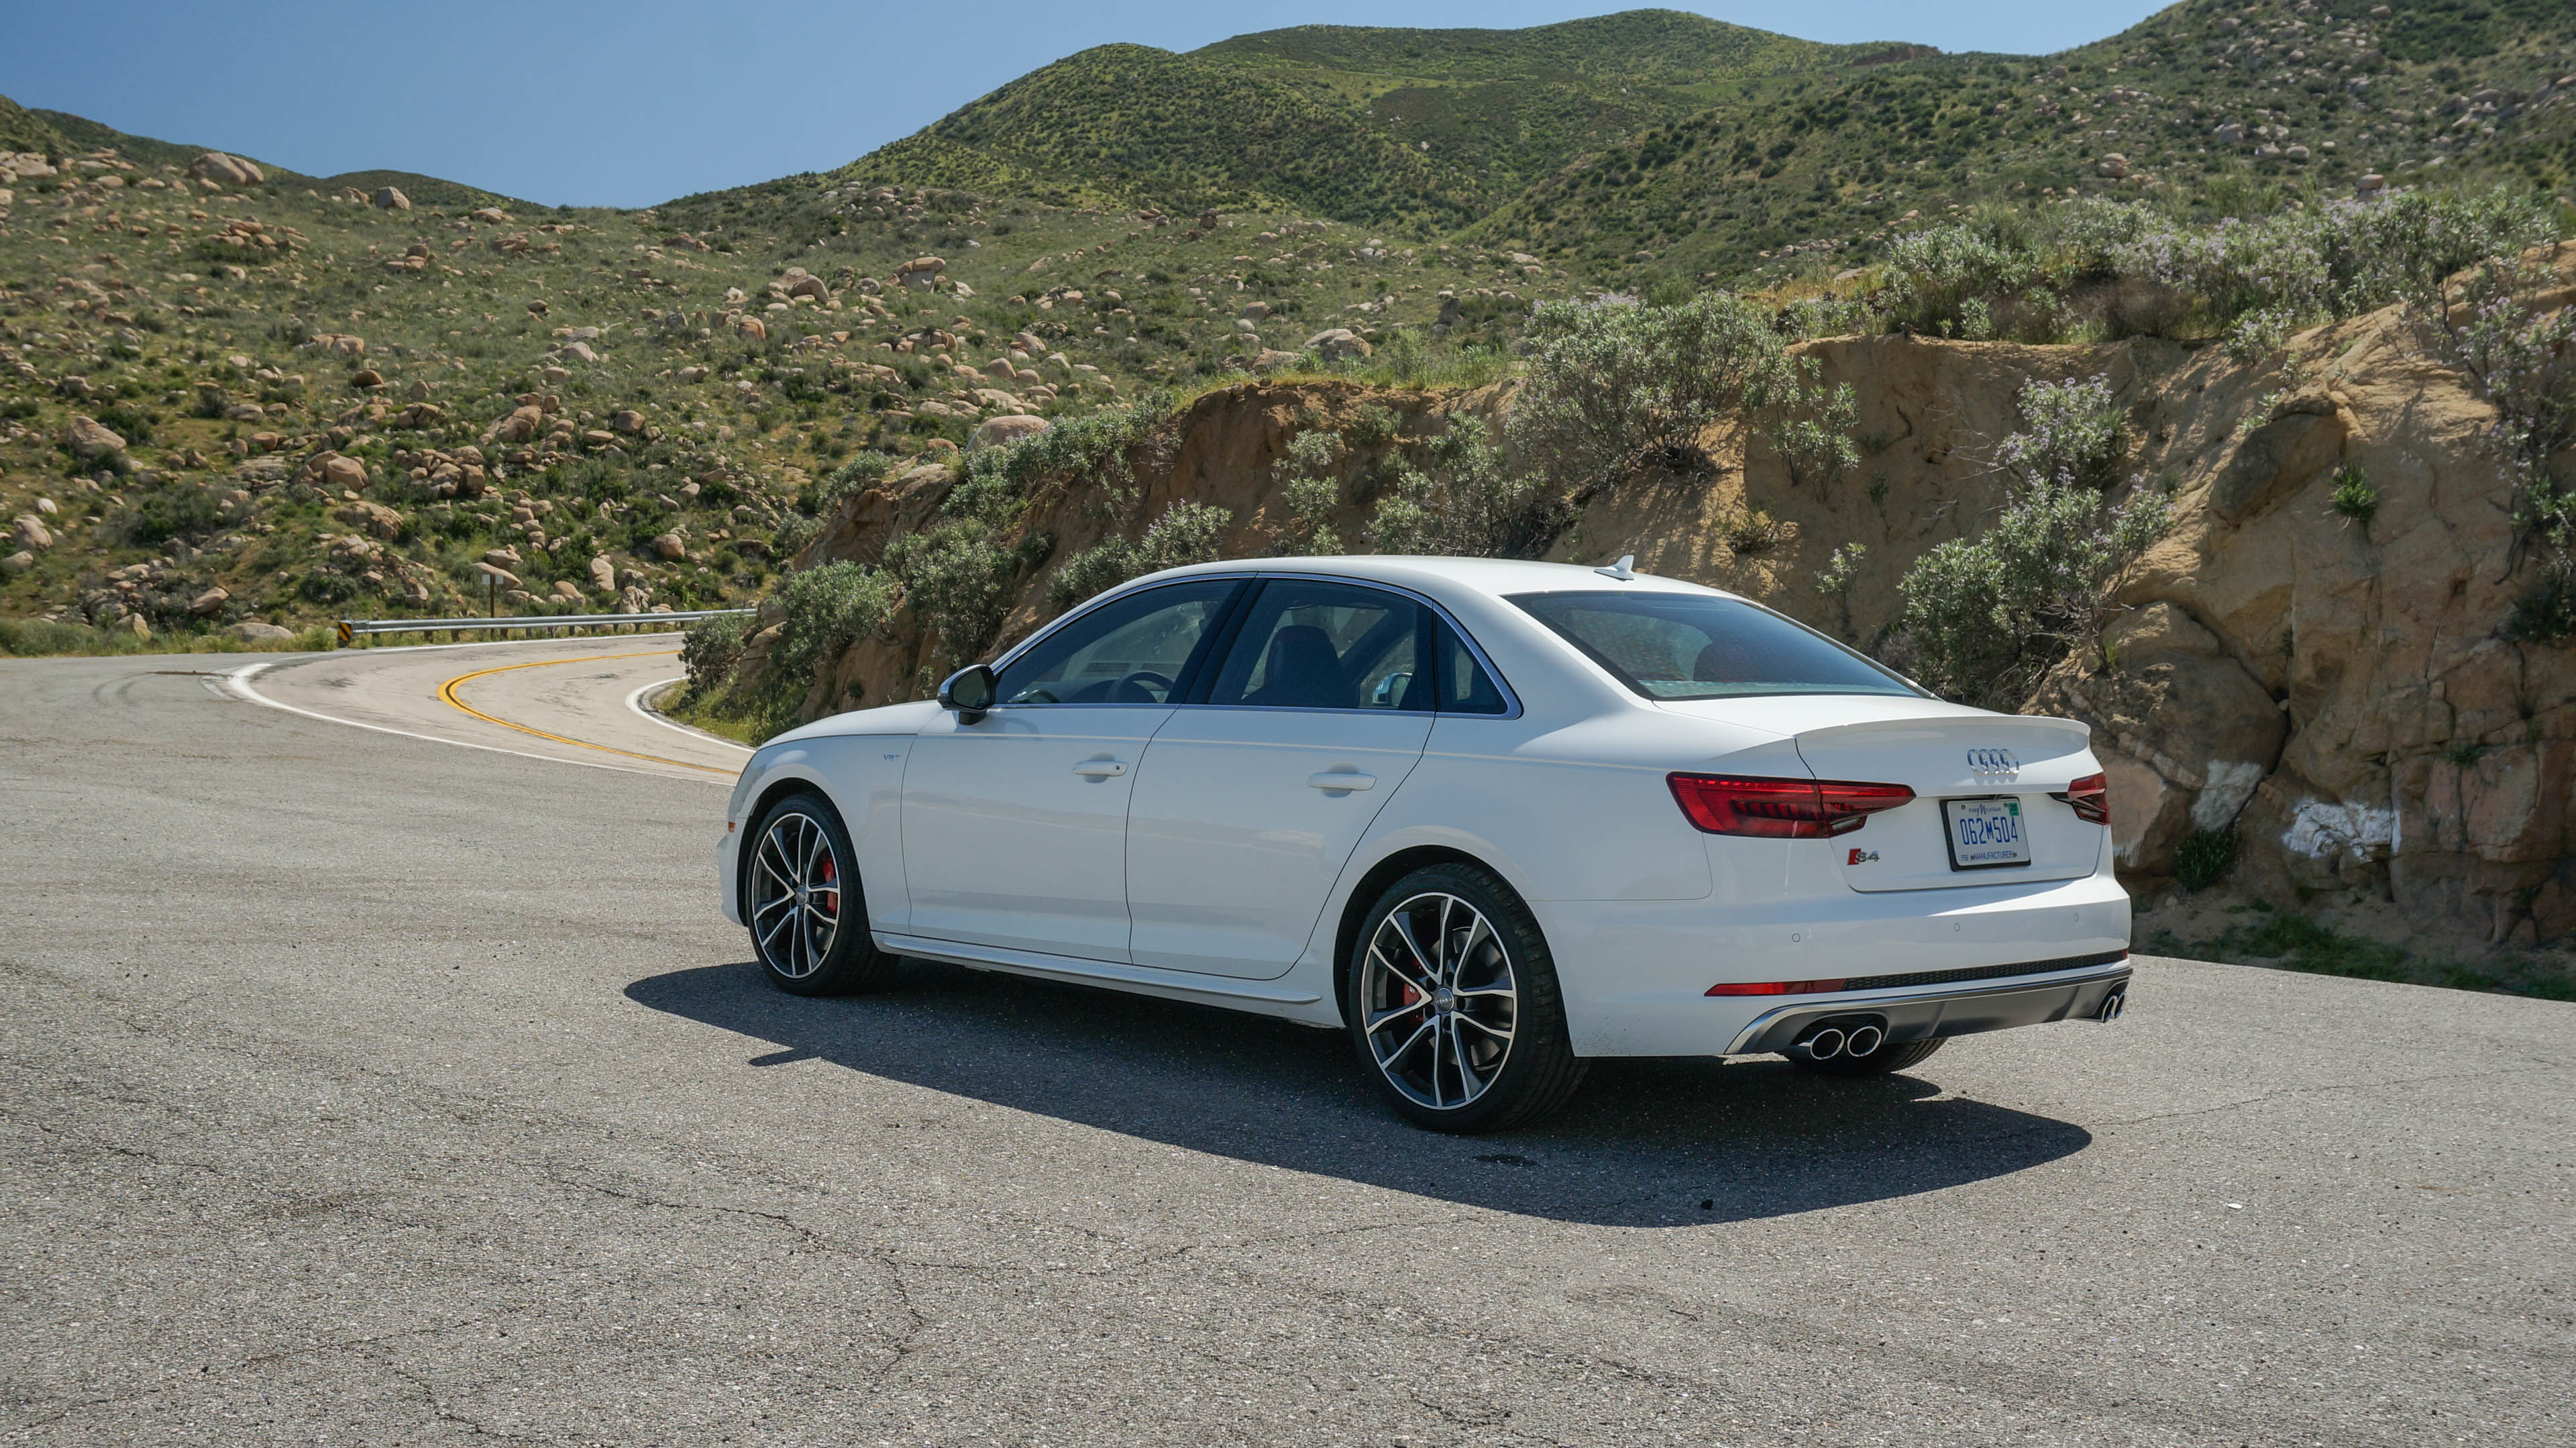 2018 Audi S4 First Drive Review: price, release date, specs, features, more  - CNET